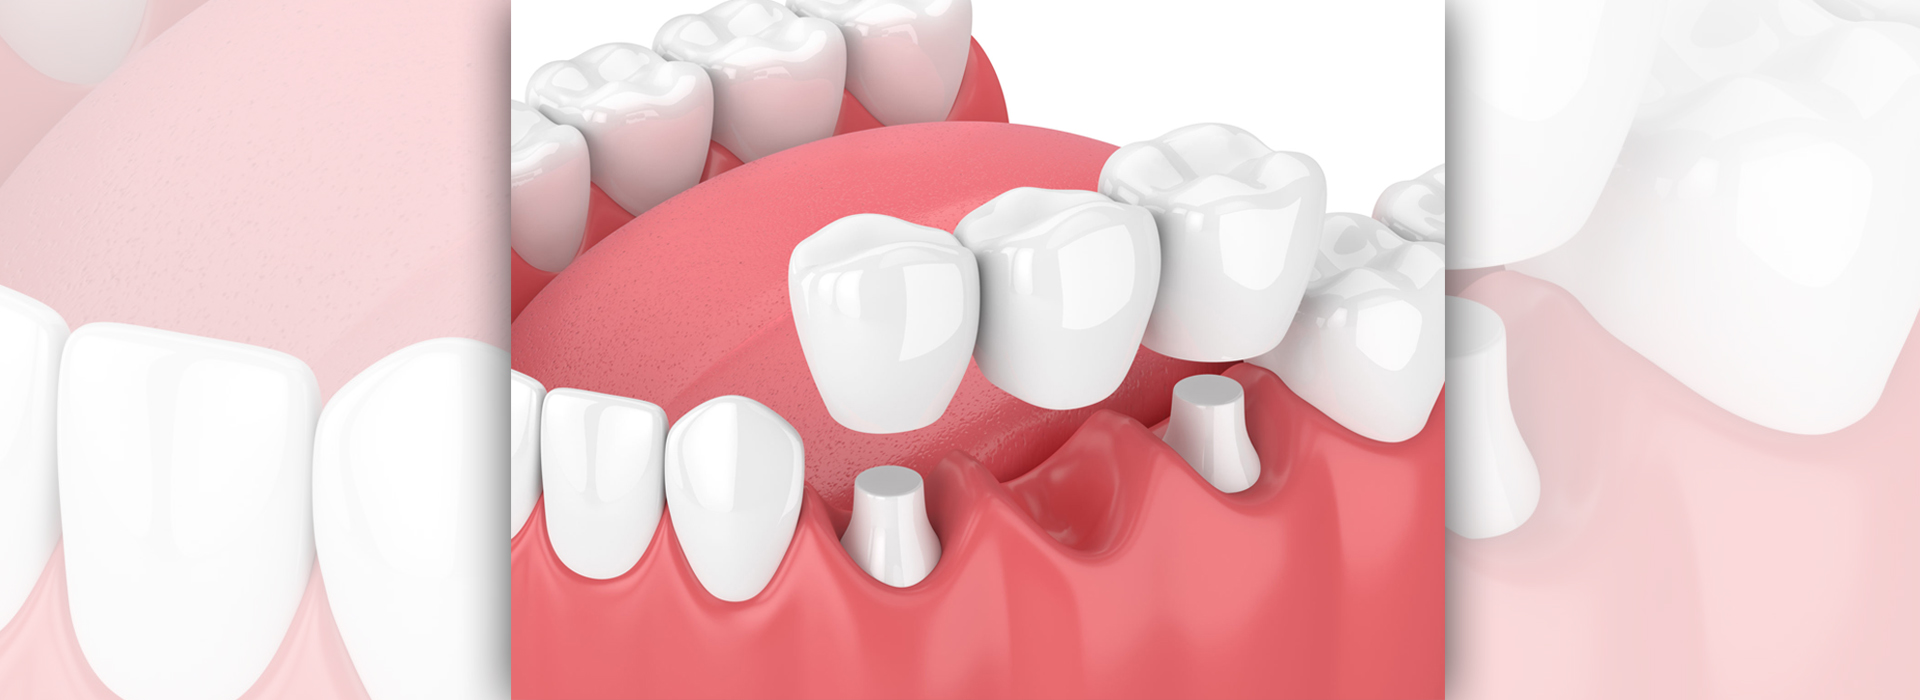 Crown & Bridge for Replacement of Teeth